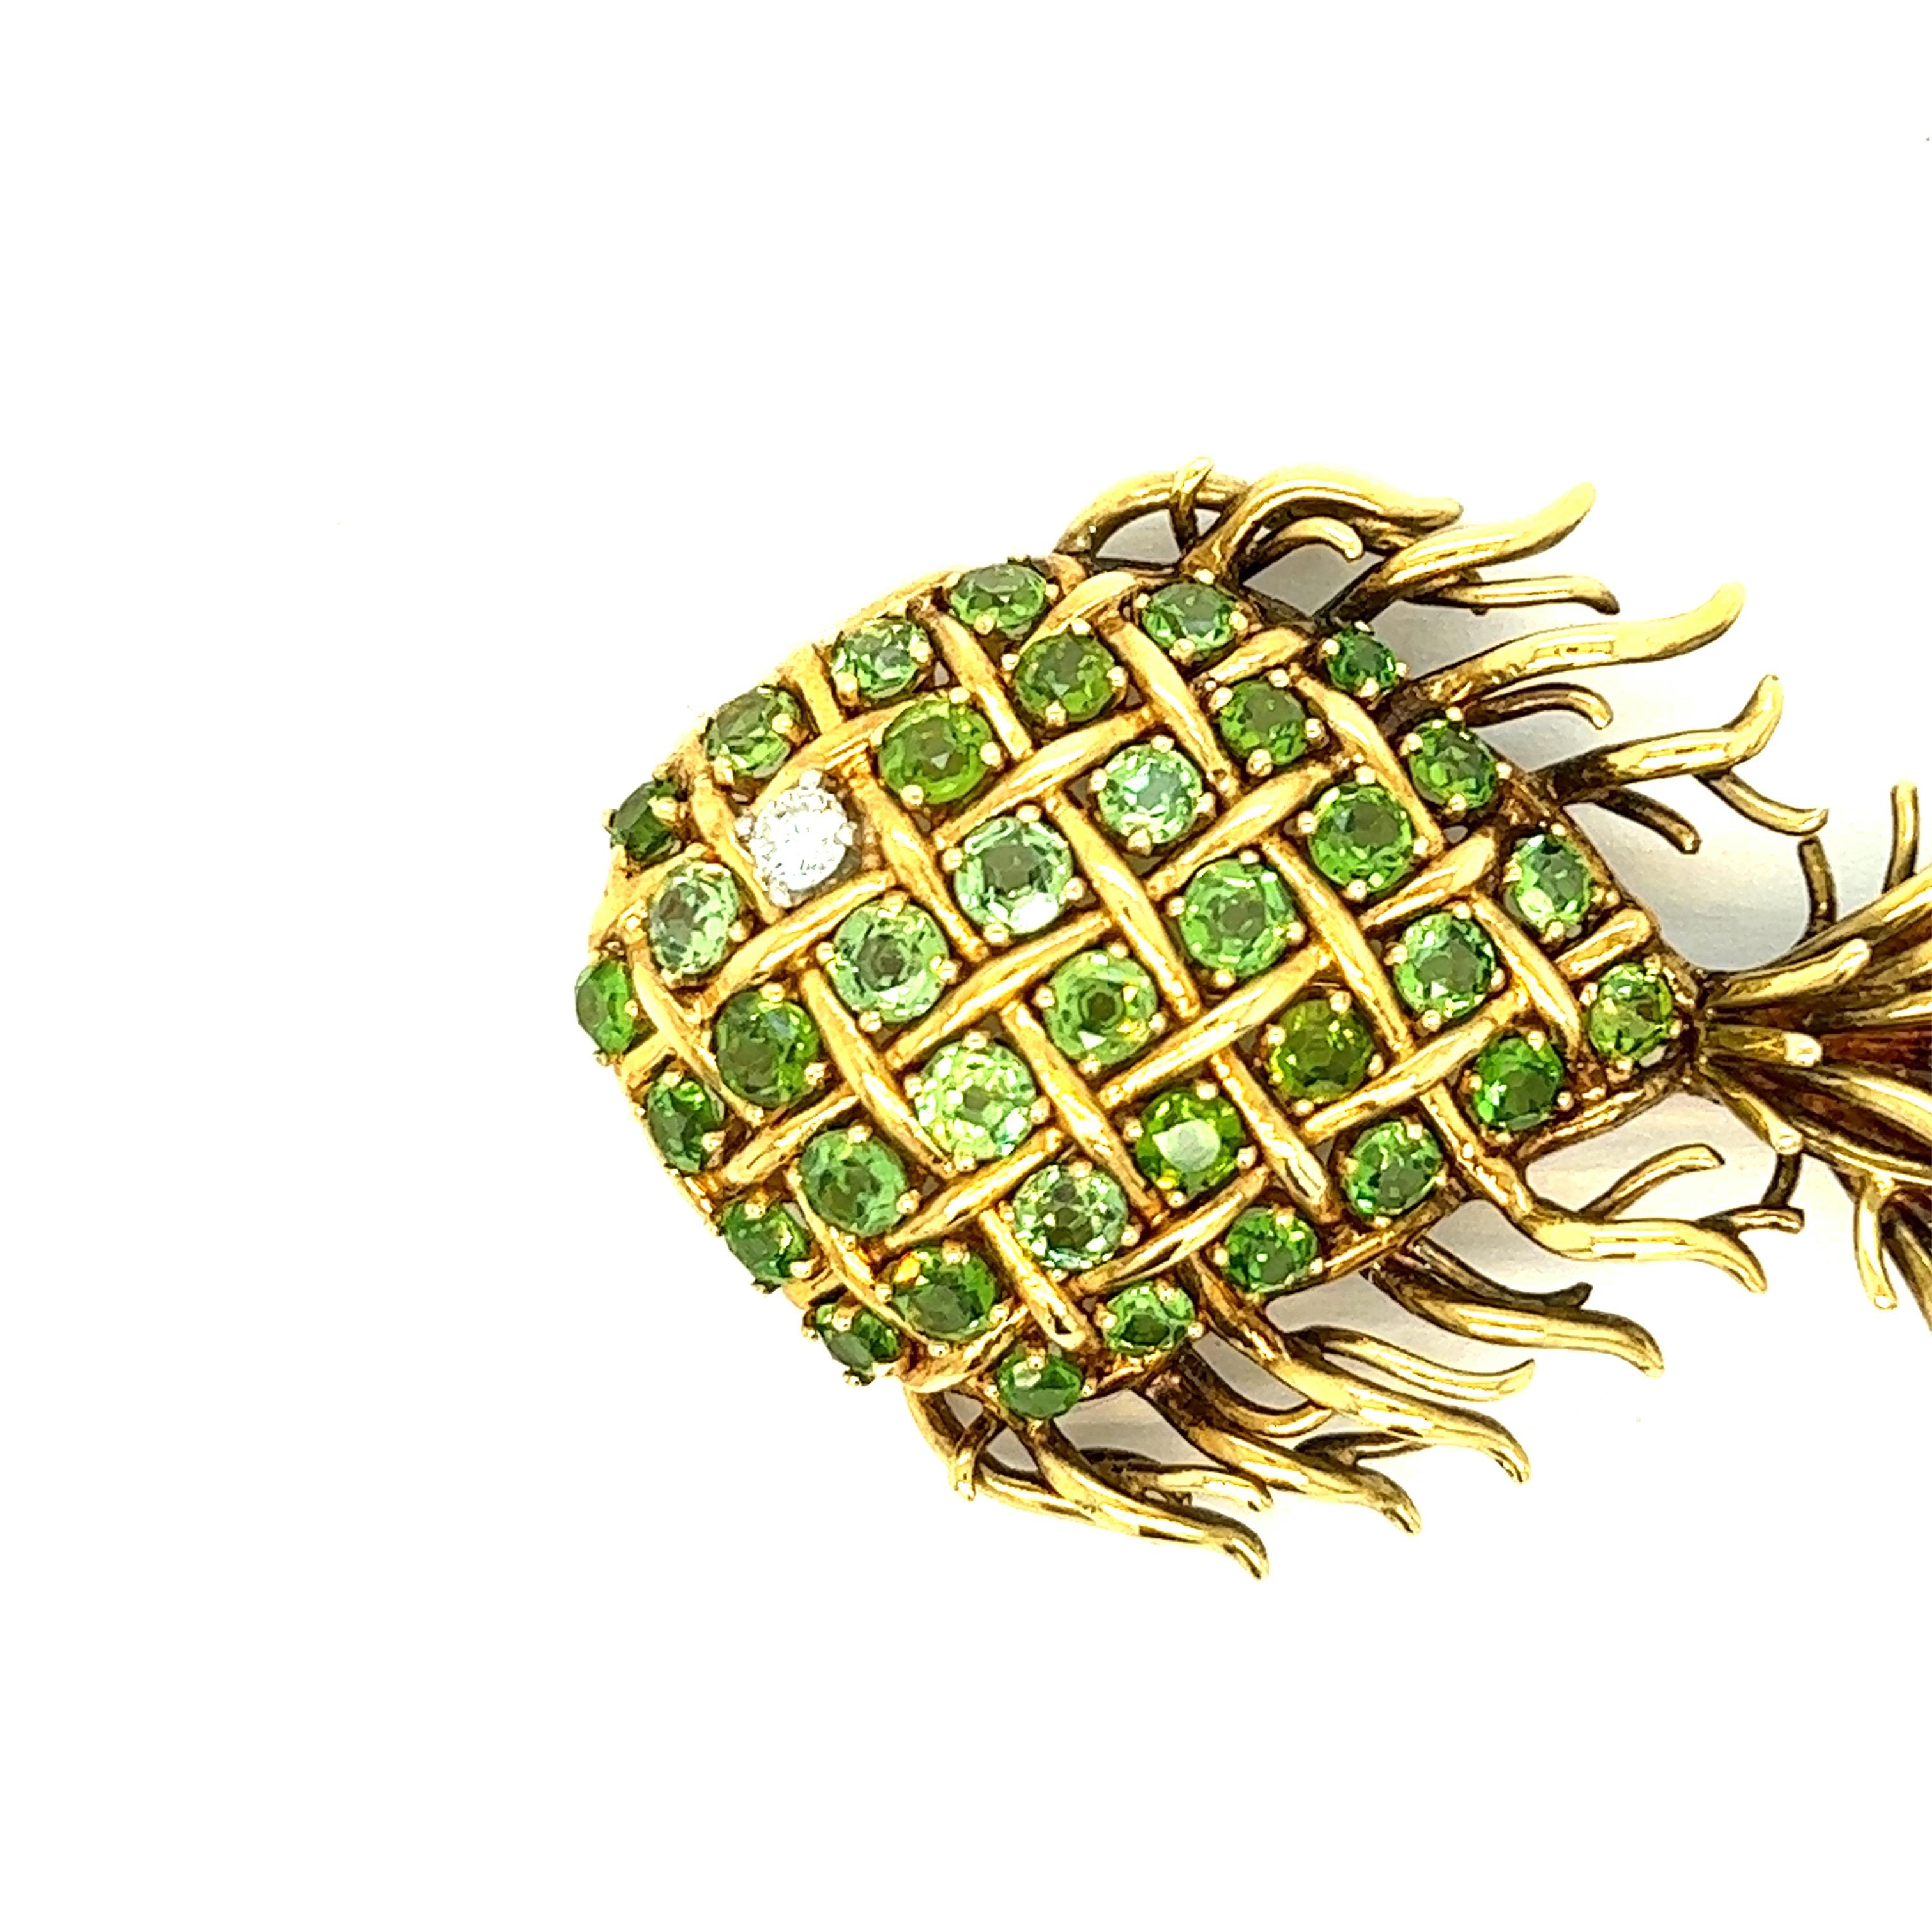 Tiffany & Co. demantoid garnet and diamond fish brooch 

Round-cut demantoid garnets of approximately 1.60 carats, one round brilliant-cut diamond, 18 karat yellow gold; marked Tiffany & Co., 18k

Size: width 1.88 inches, length 1.25 inches
Total